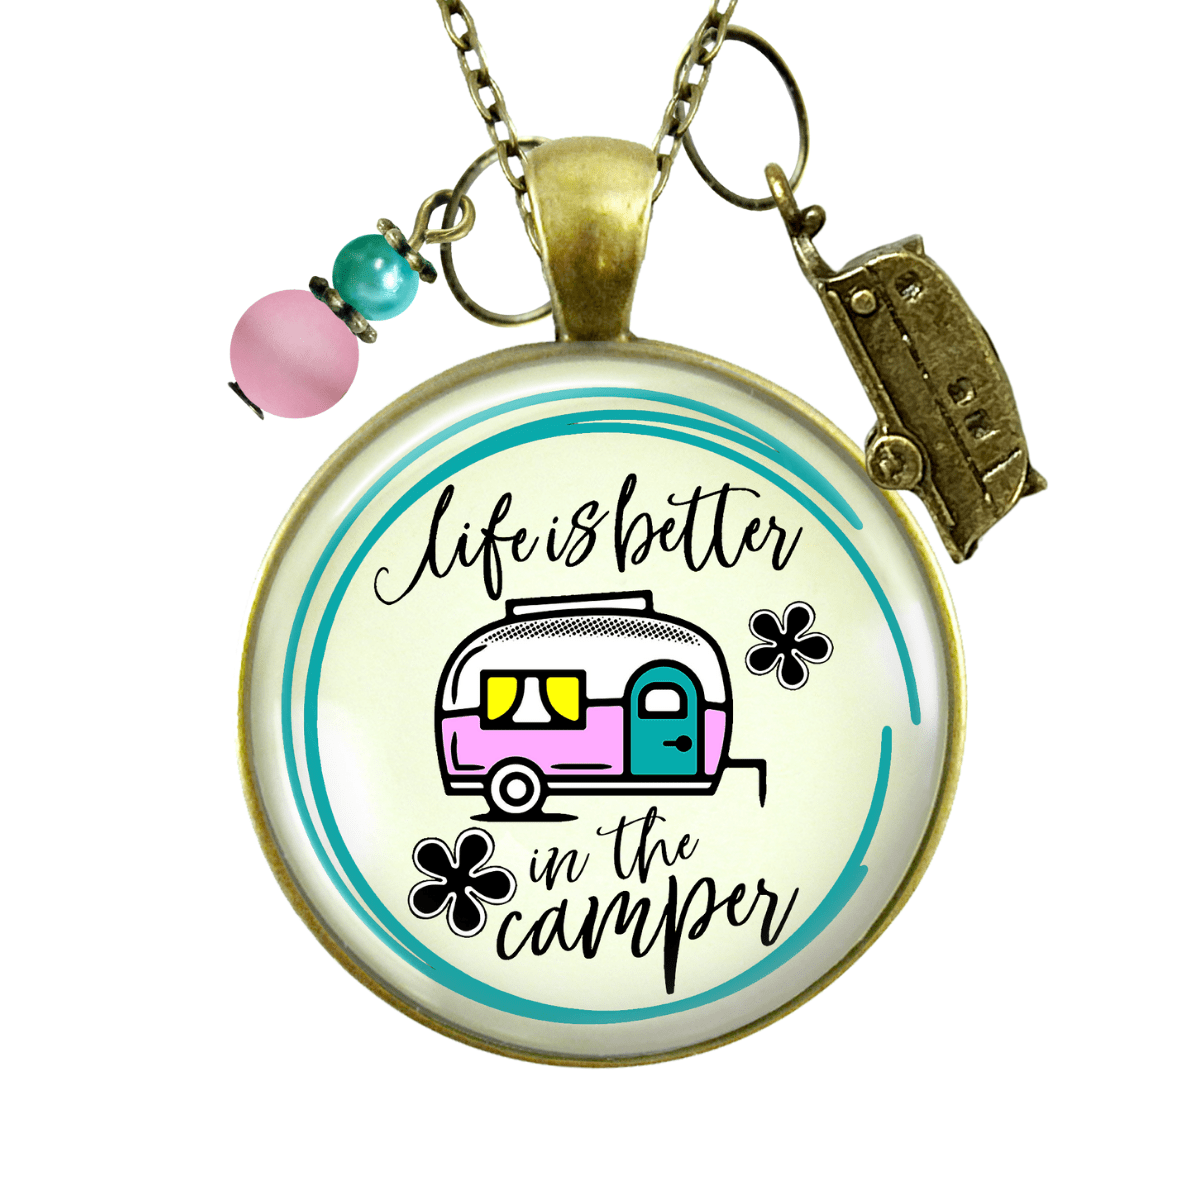 Camper Necklace Life Is Better Happy Camping Retro Chic Fifth-Wheel Jewelry Trailer RV Charm Gift  Necklace - Gutsy Goodness Handmade Jewelry